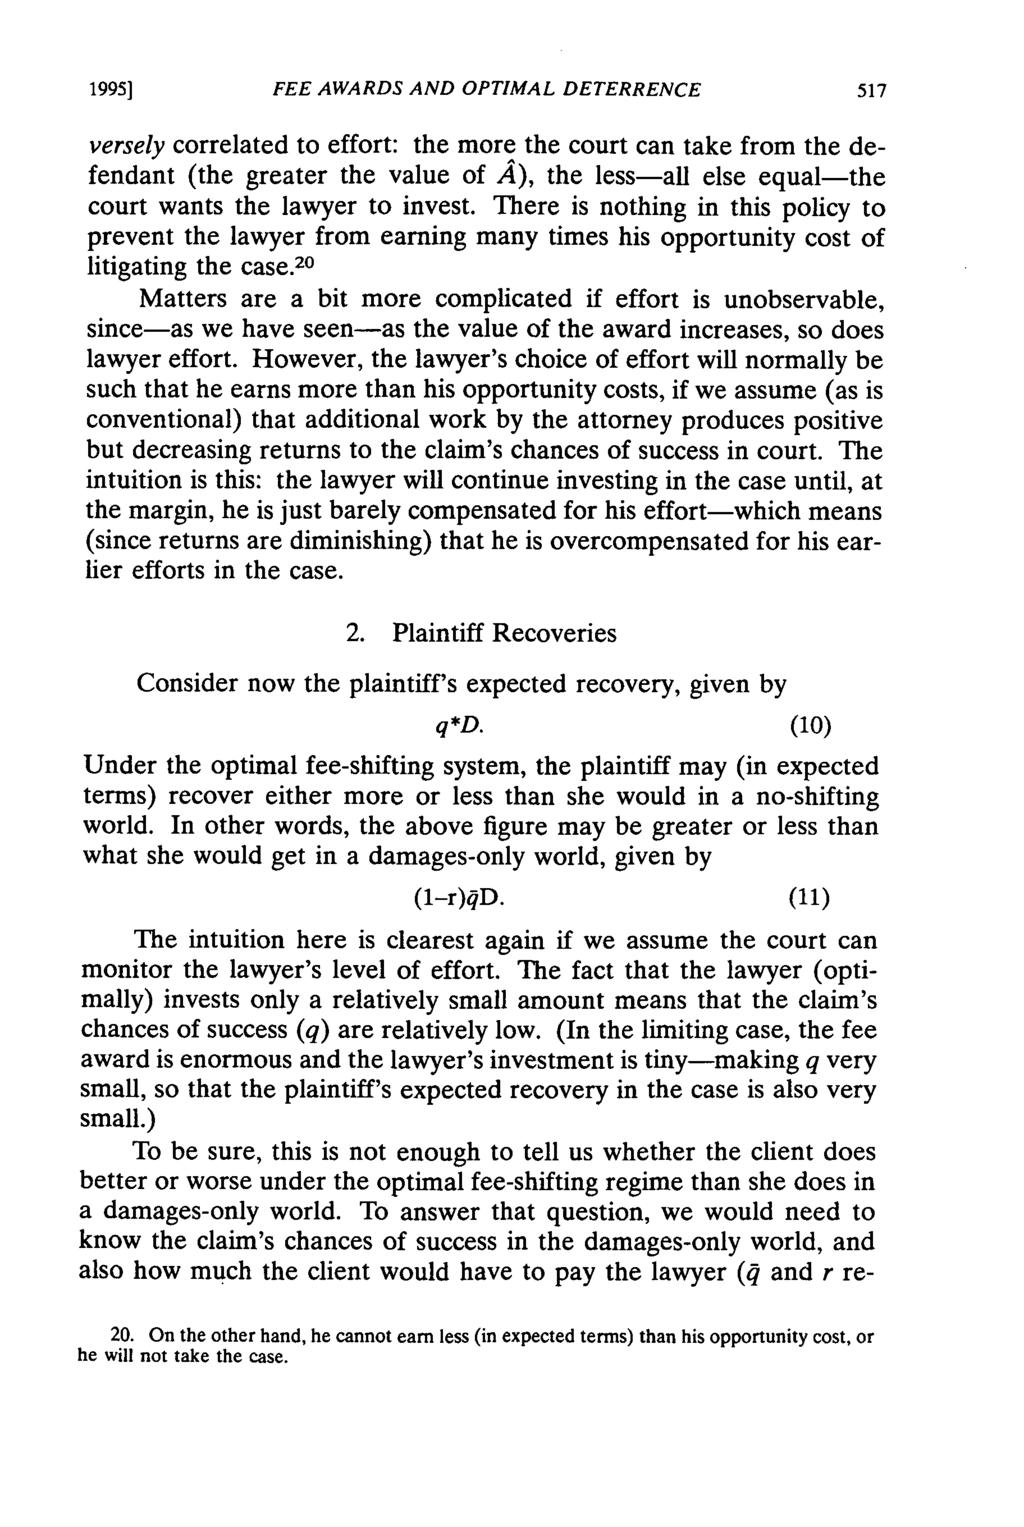 1995] FEE AWARDS AND OPTIMAL DETERRENCE versely correlated to effort: the more the court can take from the defendant (the greater the value of A), the less-all else equal-the court wants the lawyer